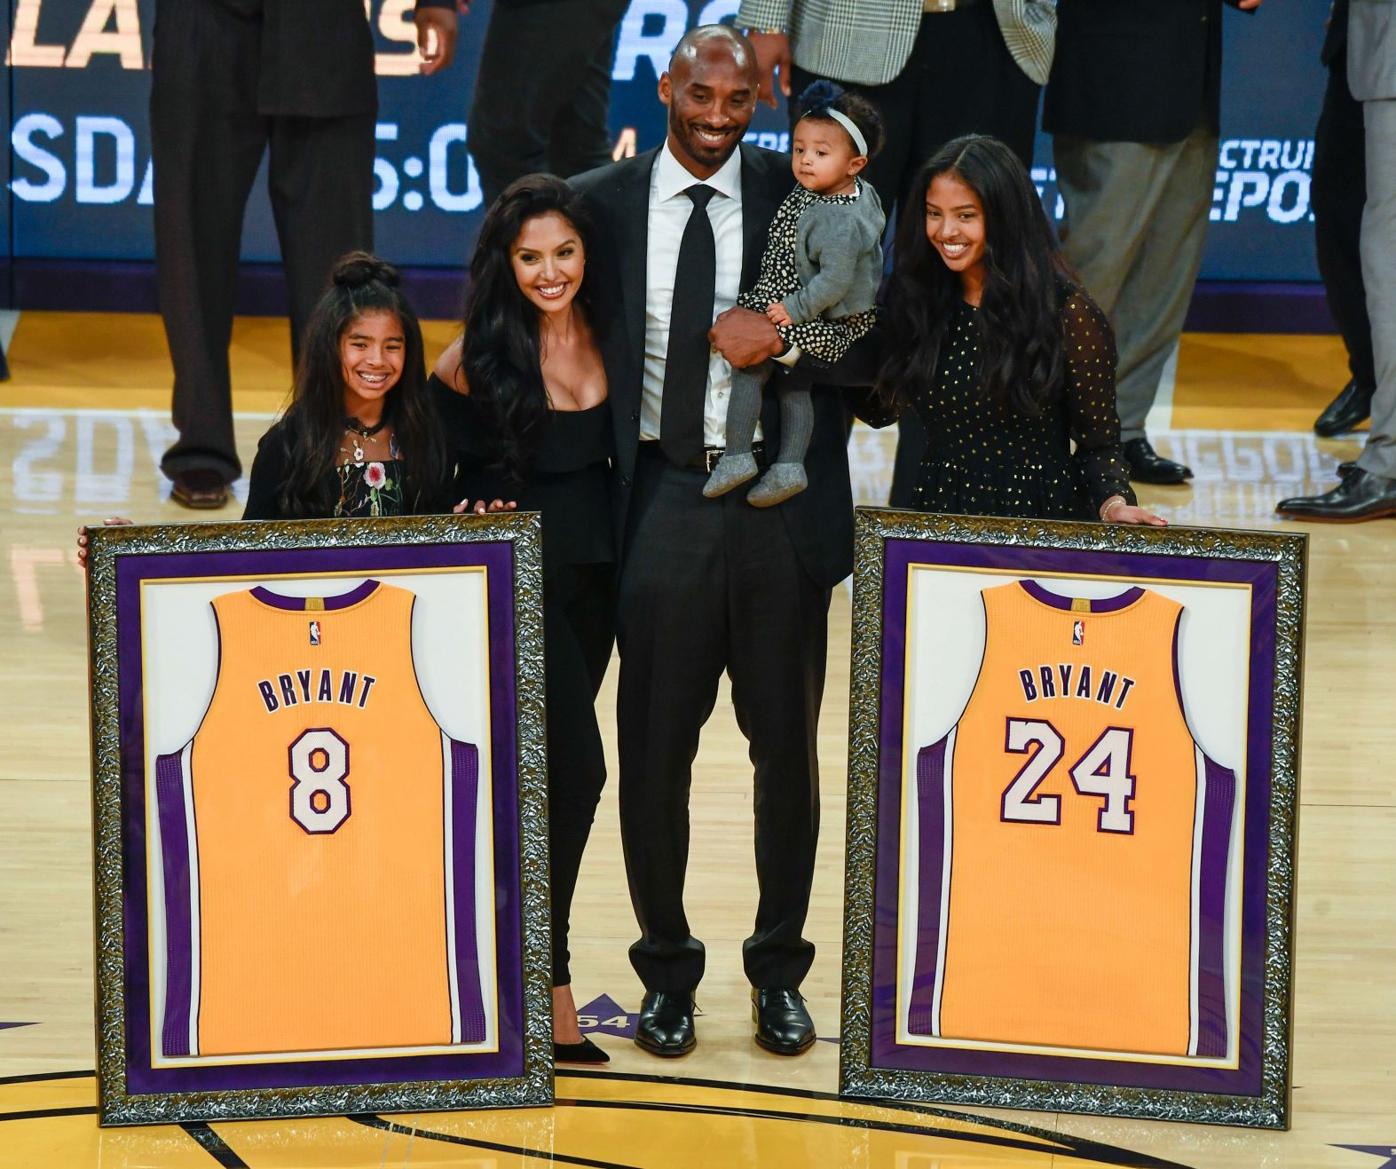 Magic Johnson & Kobe Bryant during Bryant's jersey retirement ceremony on  December 18, 2017 at STAPLES Center in Los Angeles, California Photo Print  